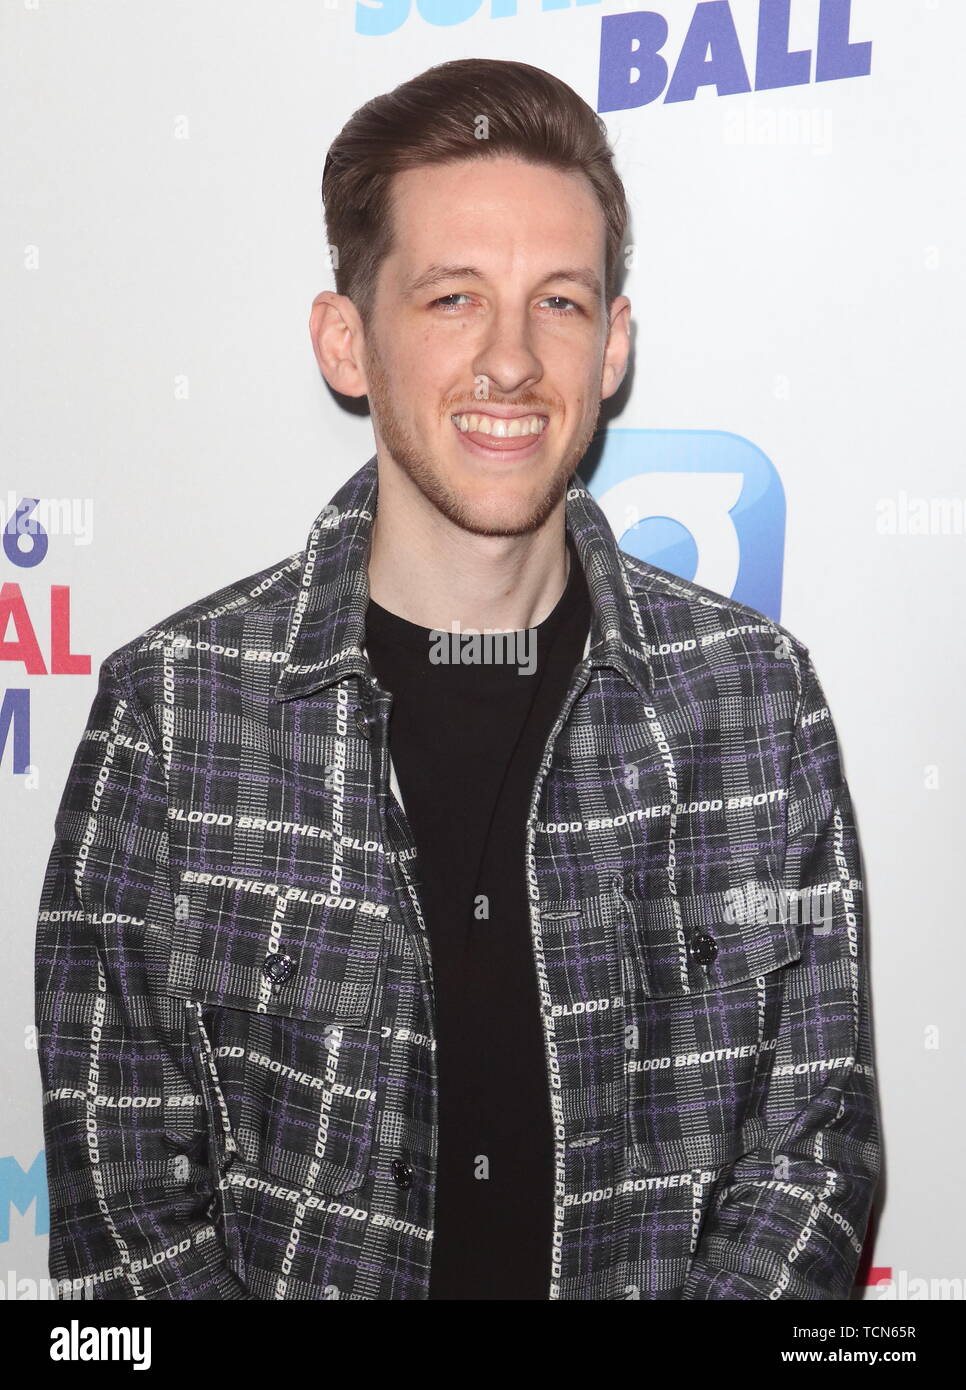 Sigala seen during the Capital FM Summertime Ball at Wembley Stadium in London. Stock Photo